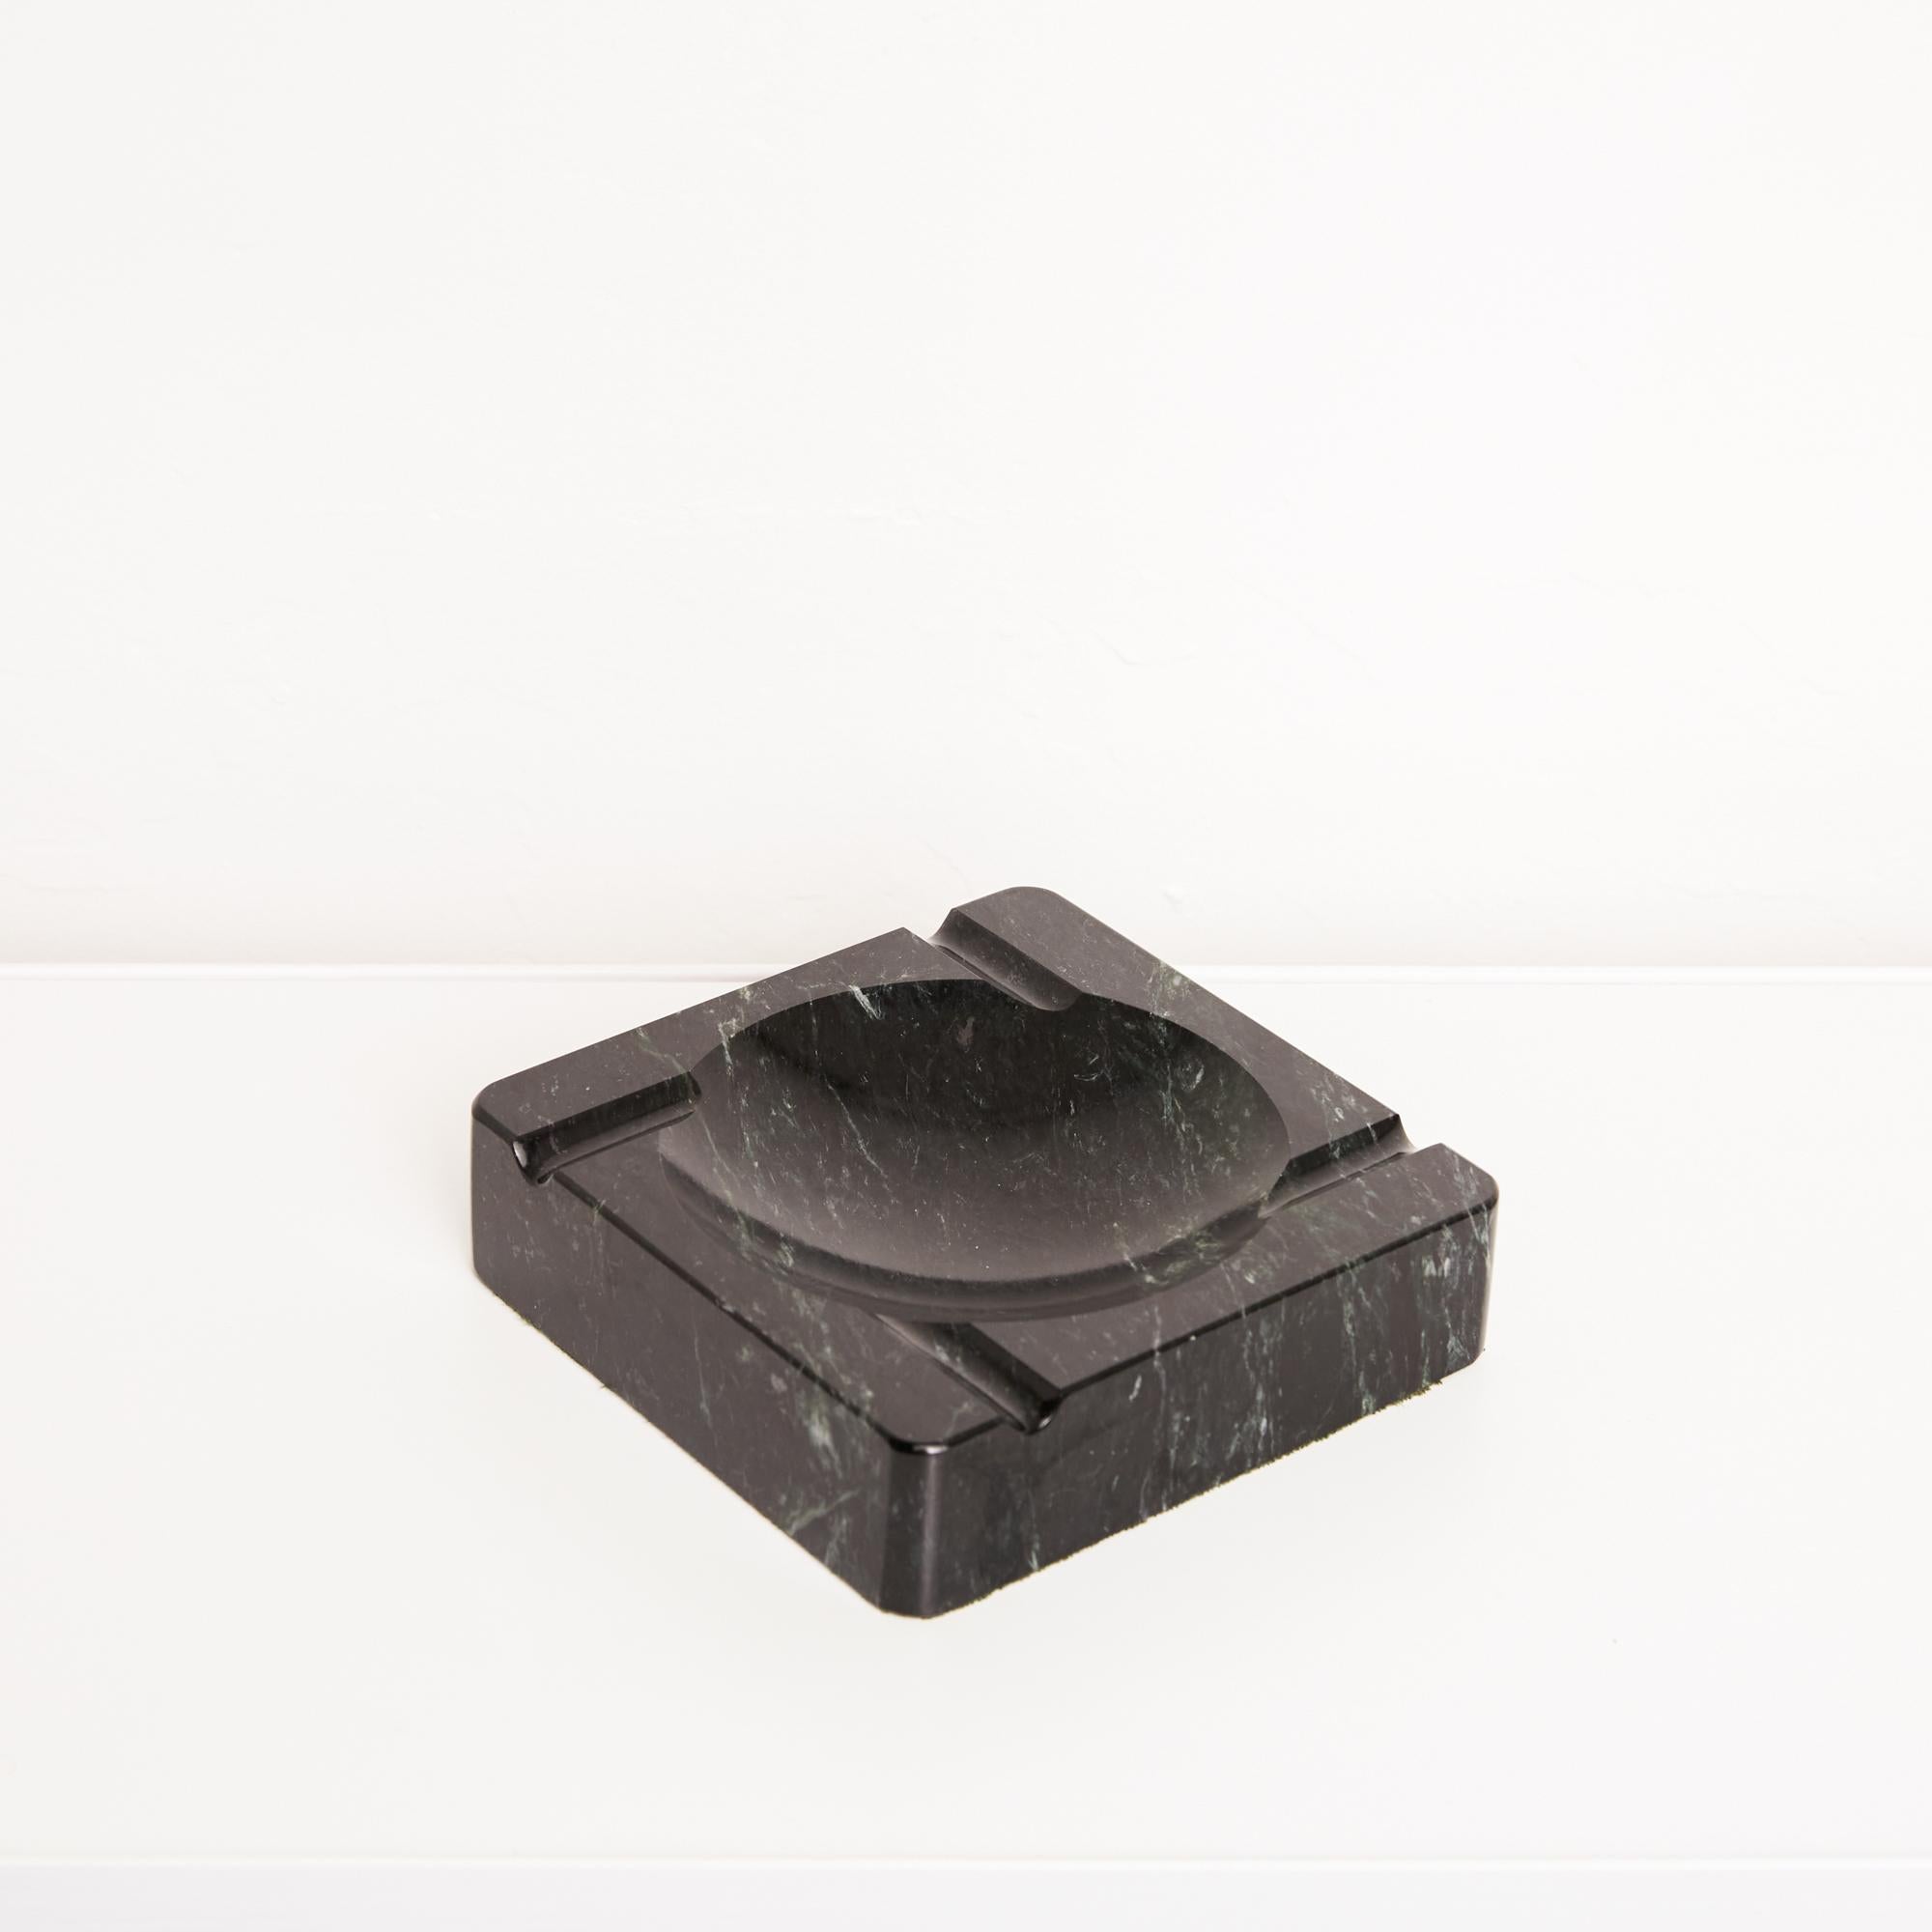 A square ashtray in a polished black marble with green and white veining by the Vermont Marble Company of Proctor, VT. The piece has a circular well, and four routed asymmetrical indentations perpendicular to its edges. The corners and edges of the